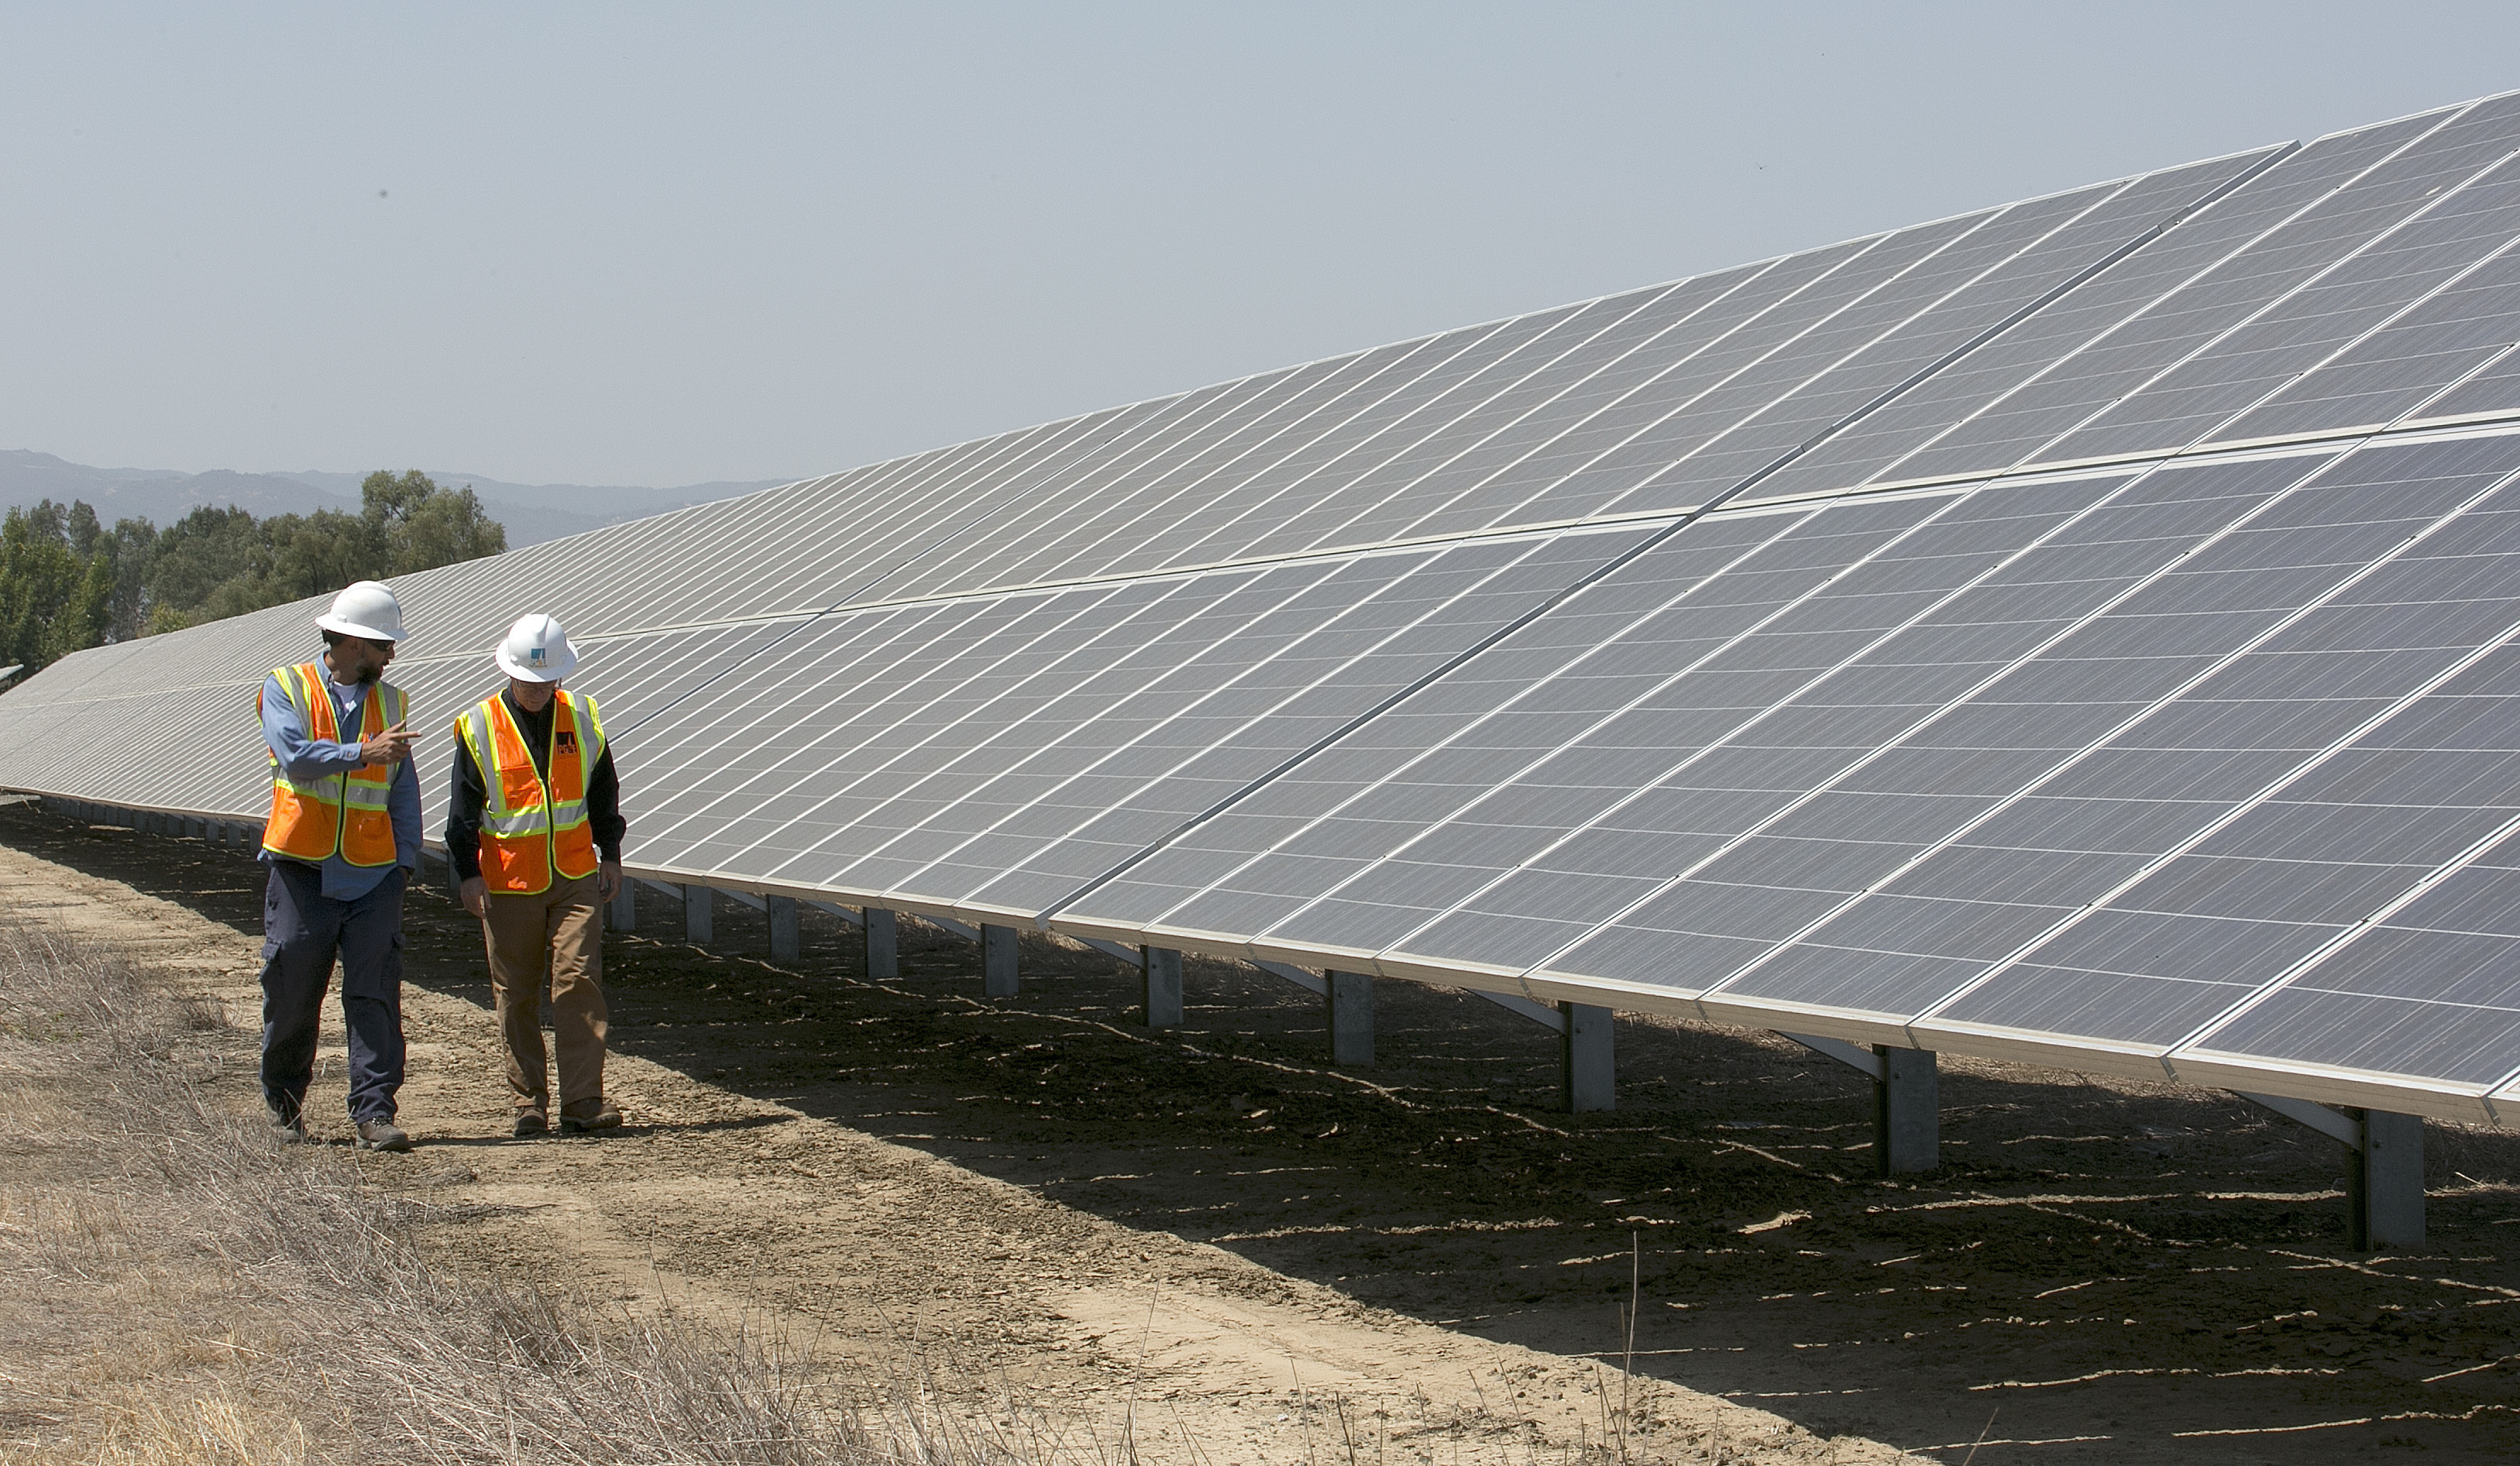 In this Aug. 17, 2017 file photo Solar Tech Joshua Valdez, left, and Senior Plant ManagerTim Wisdom walk past solar panels and at a Pacific Gas and Electric Solar Plant, in Vacaville, Calif. When California lawmakers return from their summer recess in August 2018, among the high-profile bills to consider is whether to bump up renewal energy mandates and setting a goal of getting all of California's energy from carbon-free sources by 2045.